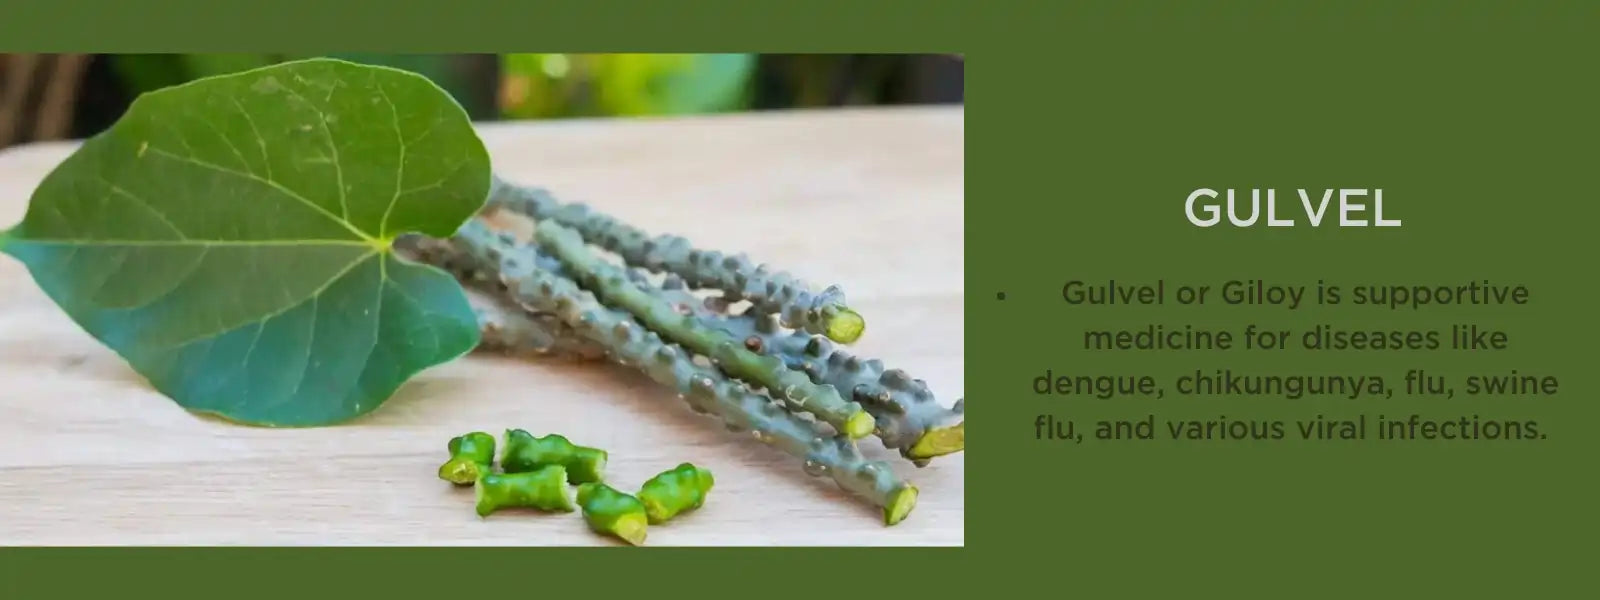 Gulvel - Health Benefits, Uses and Important Facts